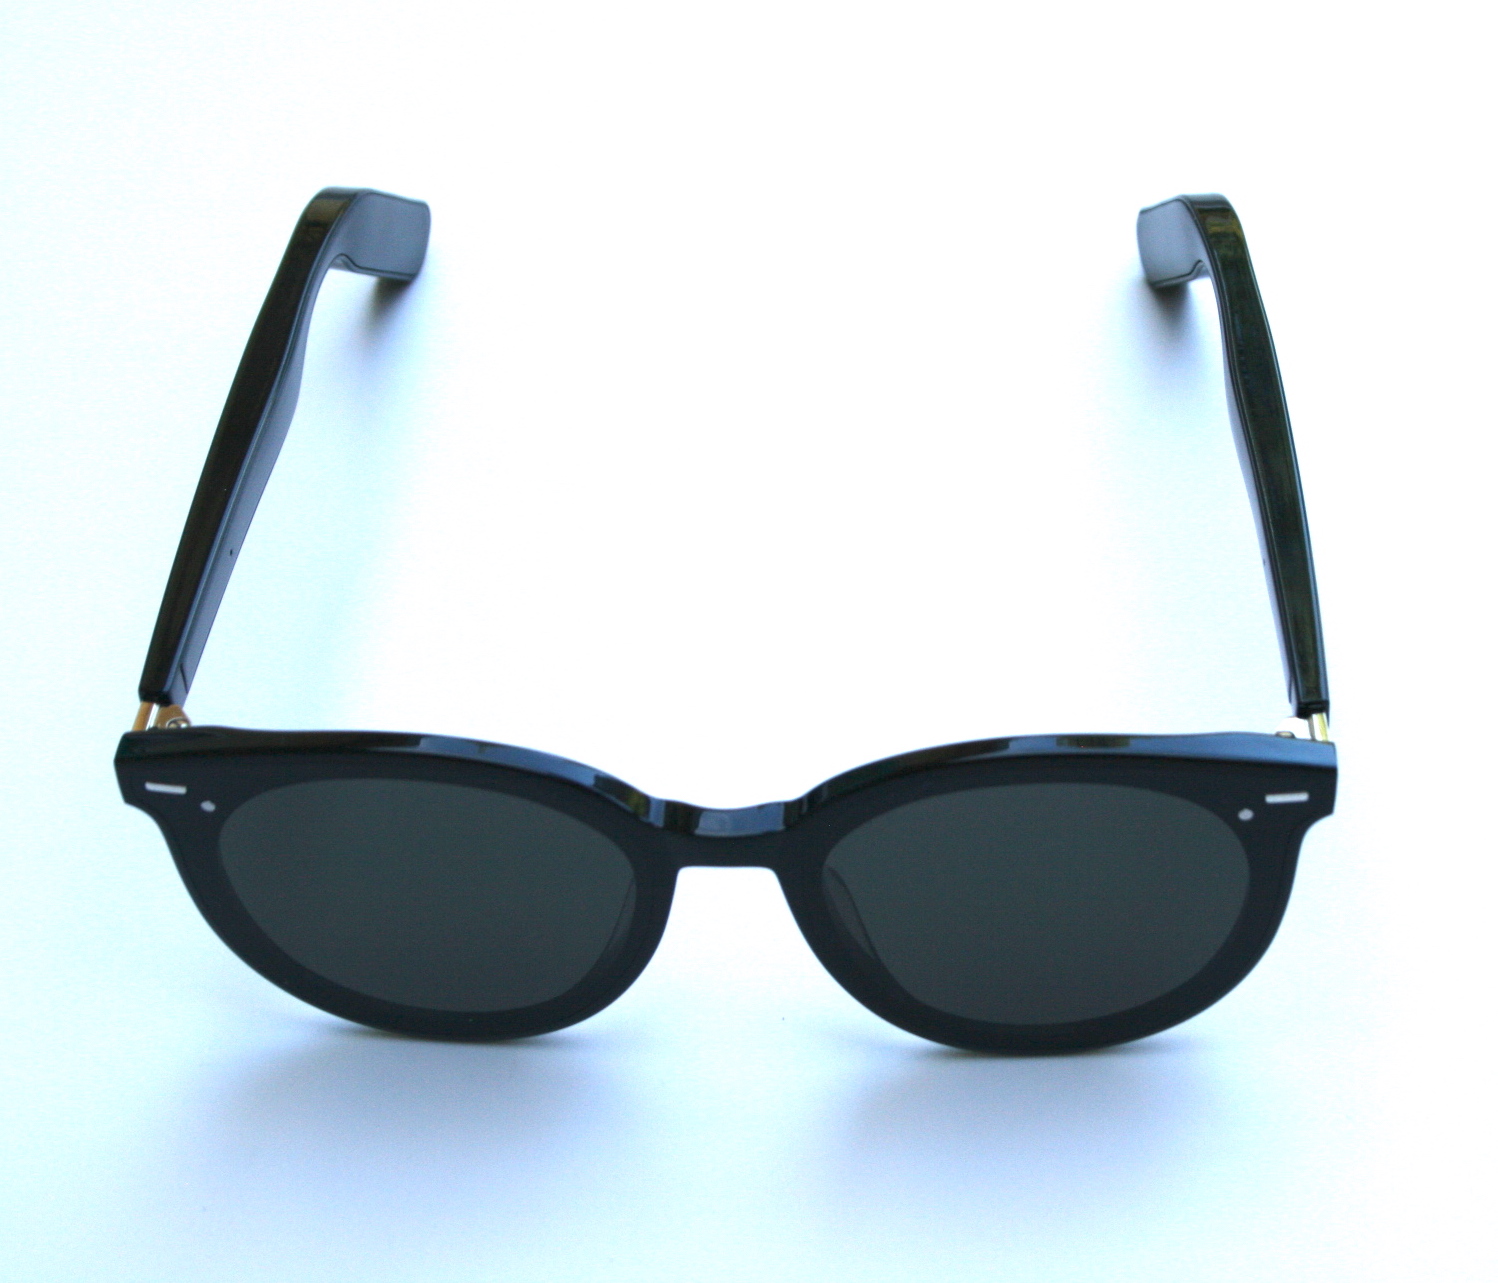 Touch Control Wireless Sunglasses - Awesomeem.com